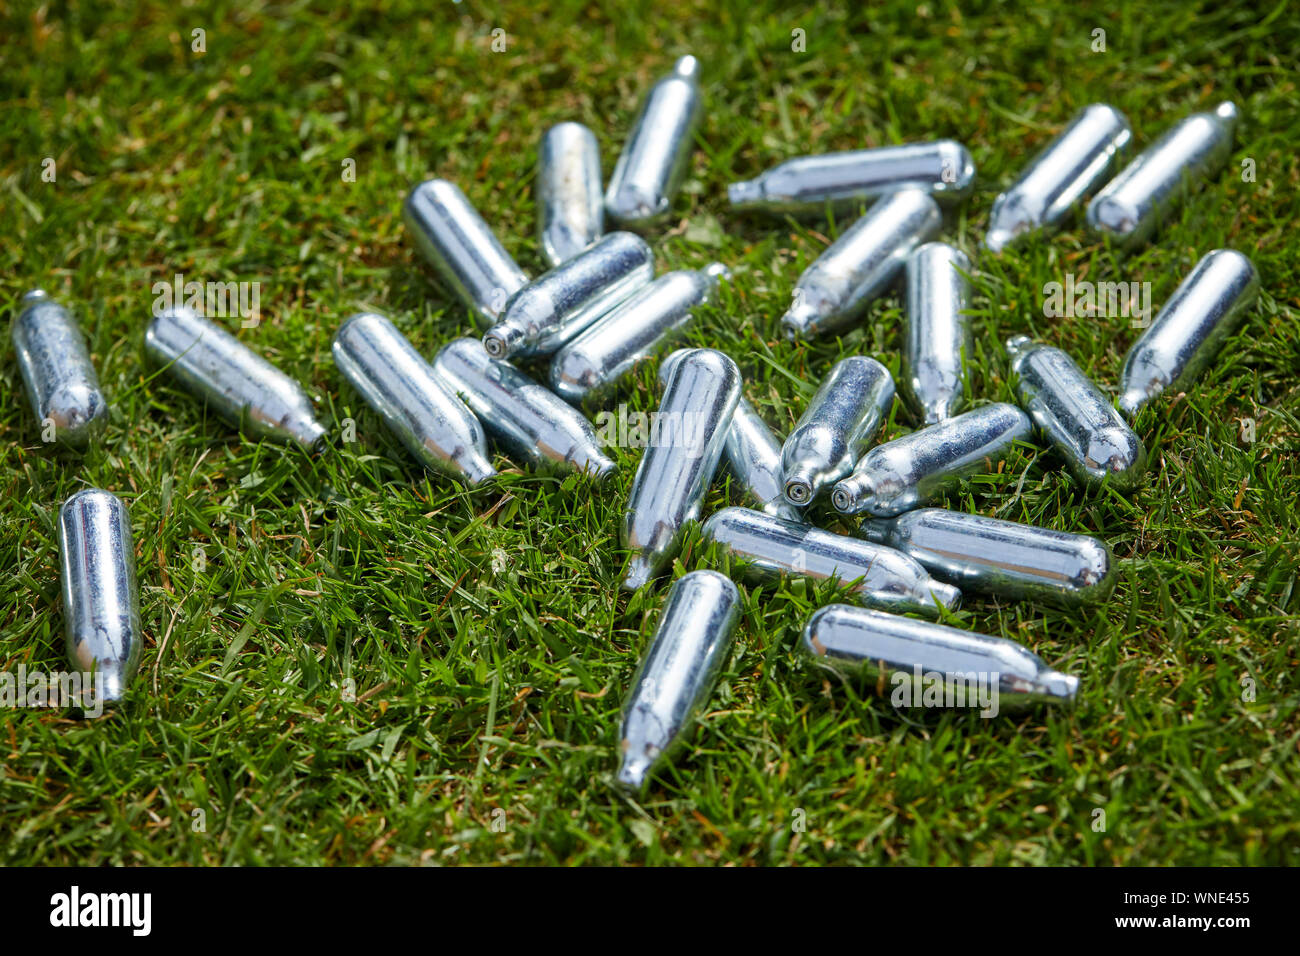 Discarded canisters of  NITROUS oxide, laughing gas or 'hippy crack metal canisters littering the streets. A colourless gas that people inhale, illega Stock Photo